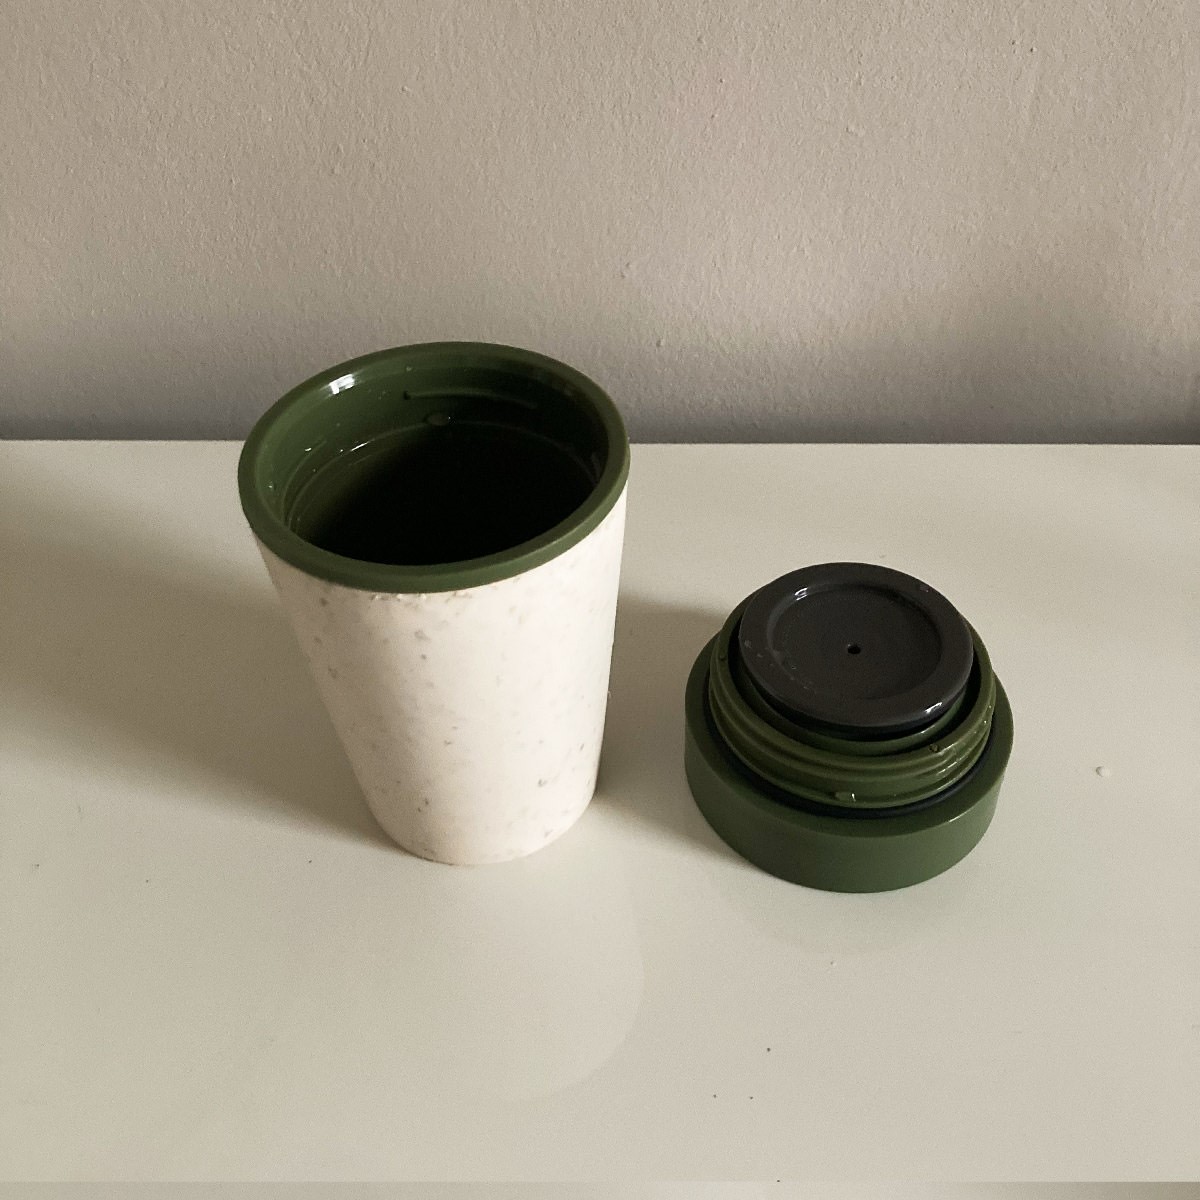 Superfried – Walk the Talk. Testing eco friendly reusable cups – Circular & Co small cup. Continuing my path towards eco living.